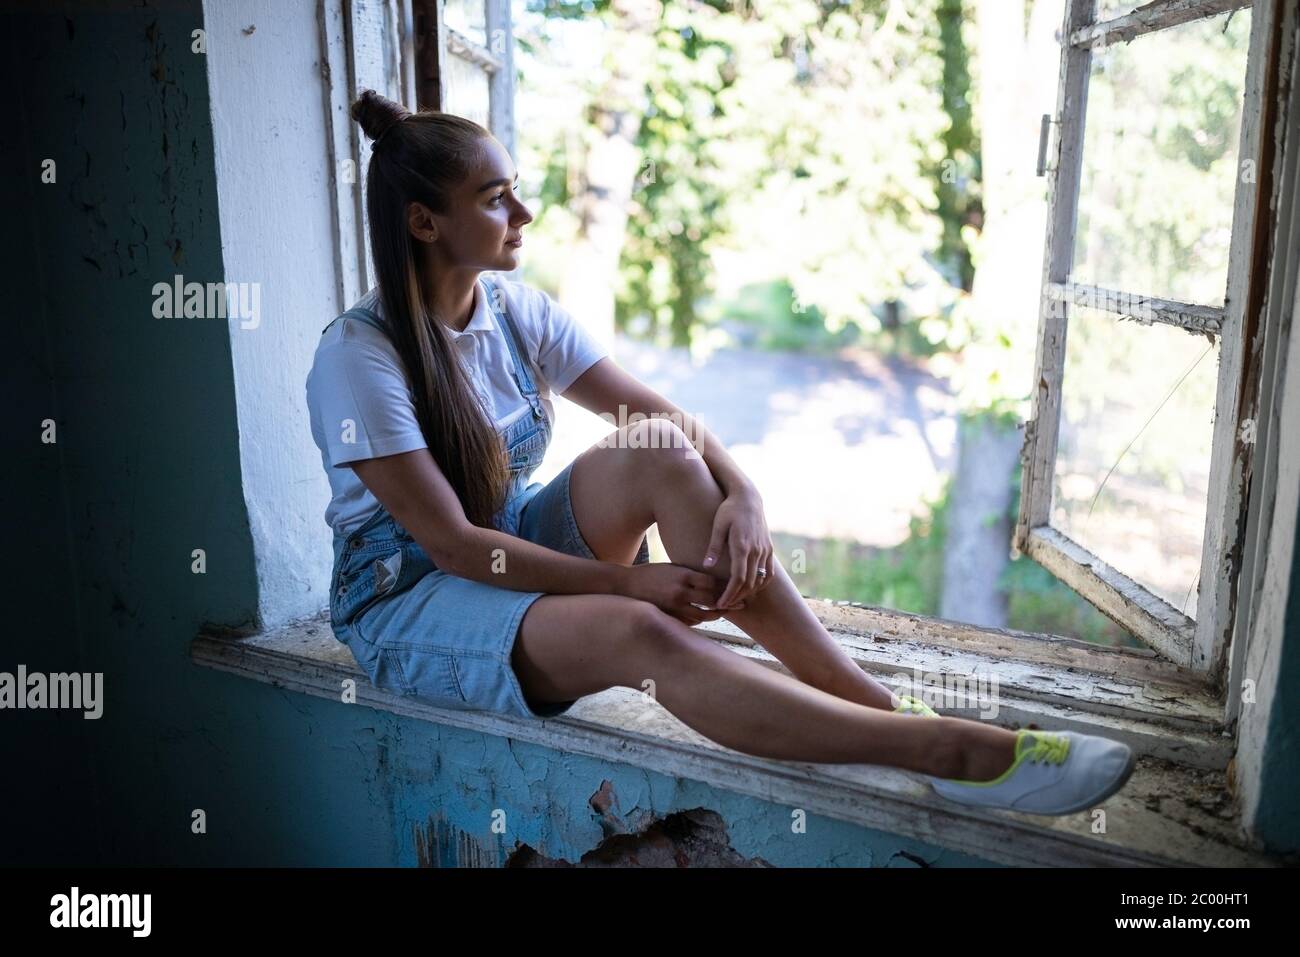 The girl is sad in the ruined house Stock Photo